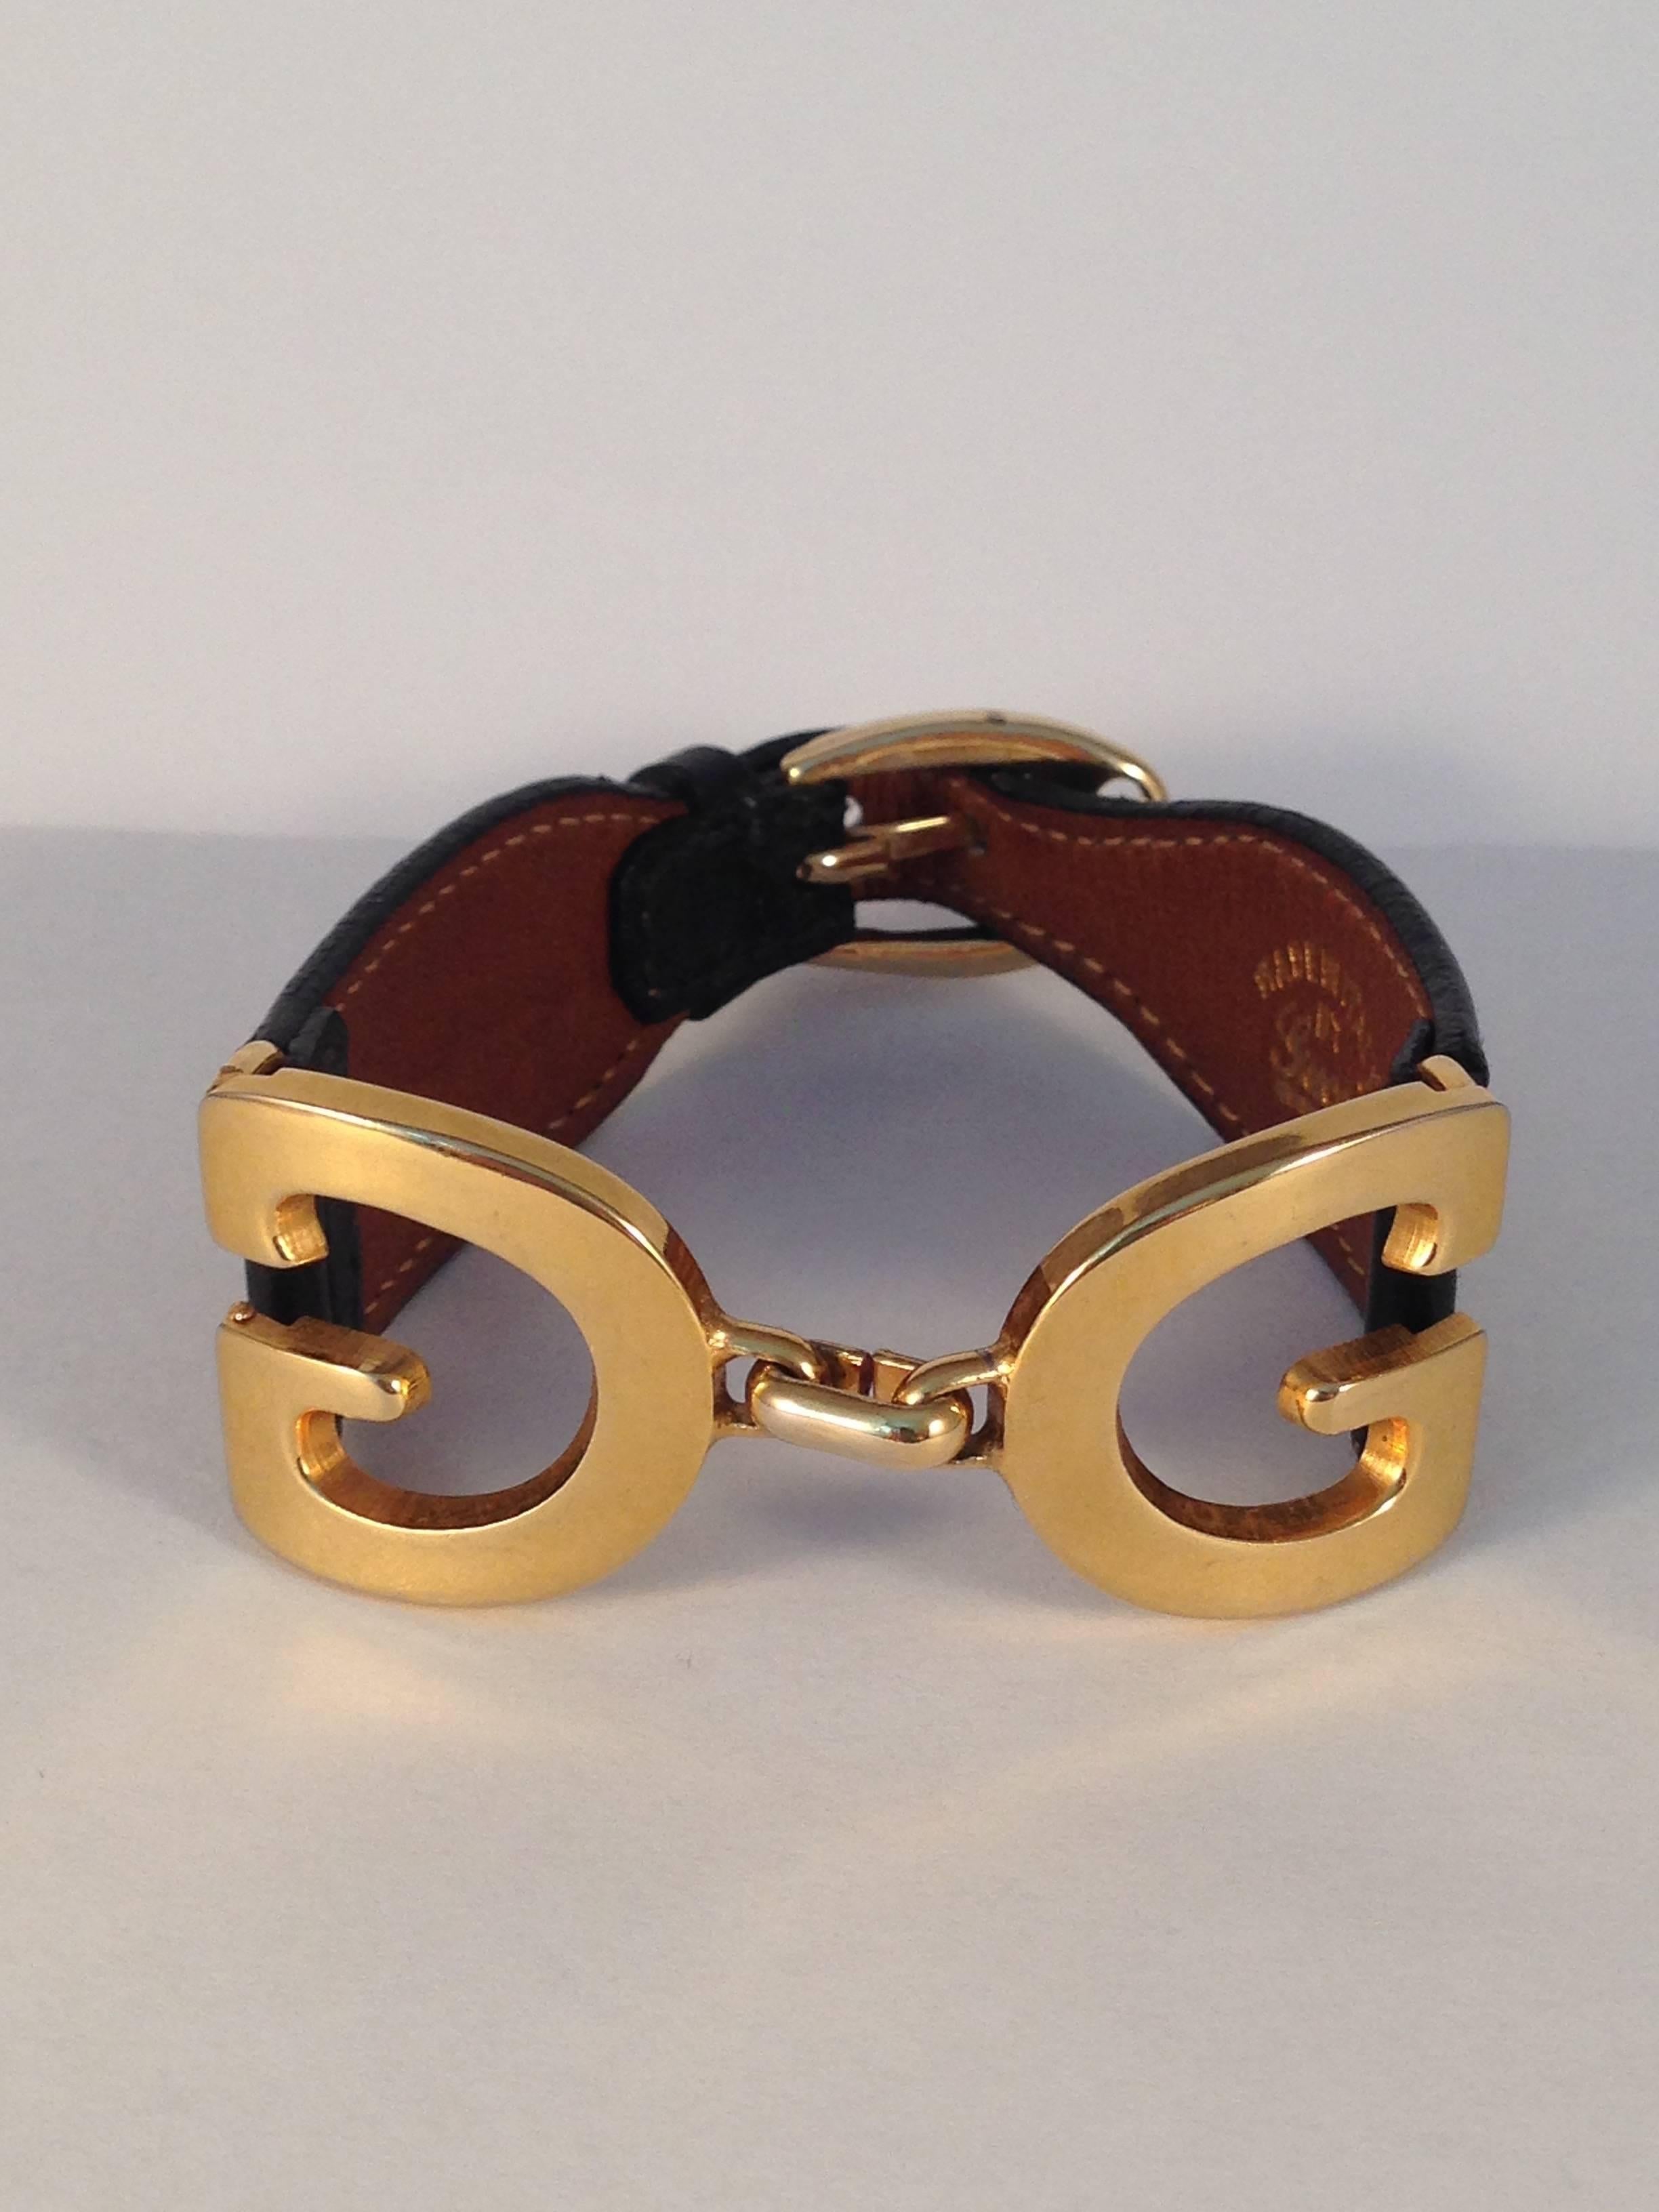 Black leather Gucci bracelet with gold-tone double 